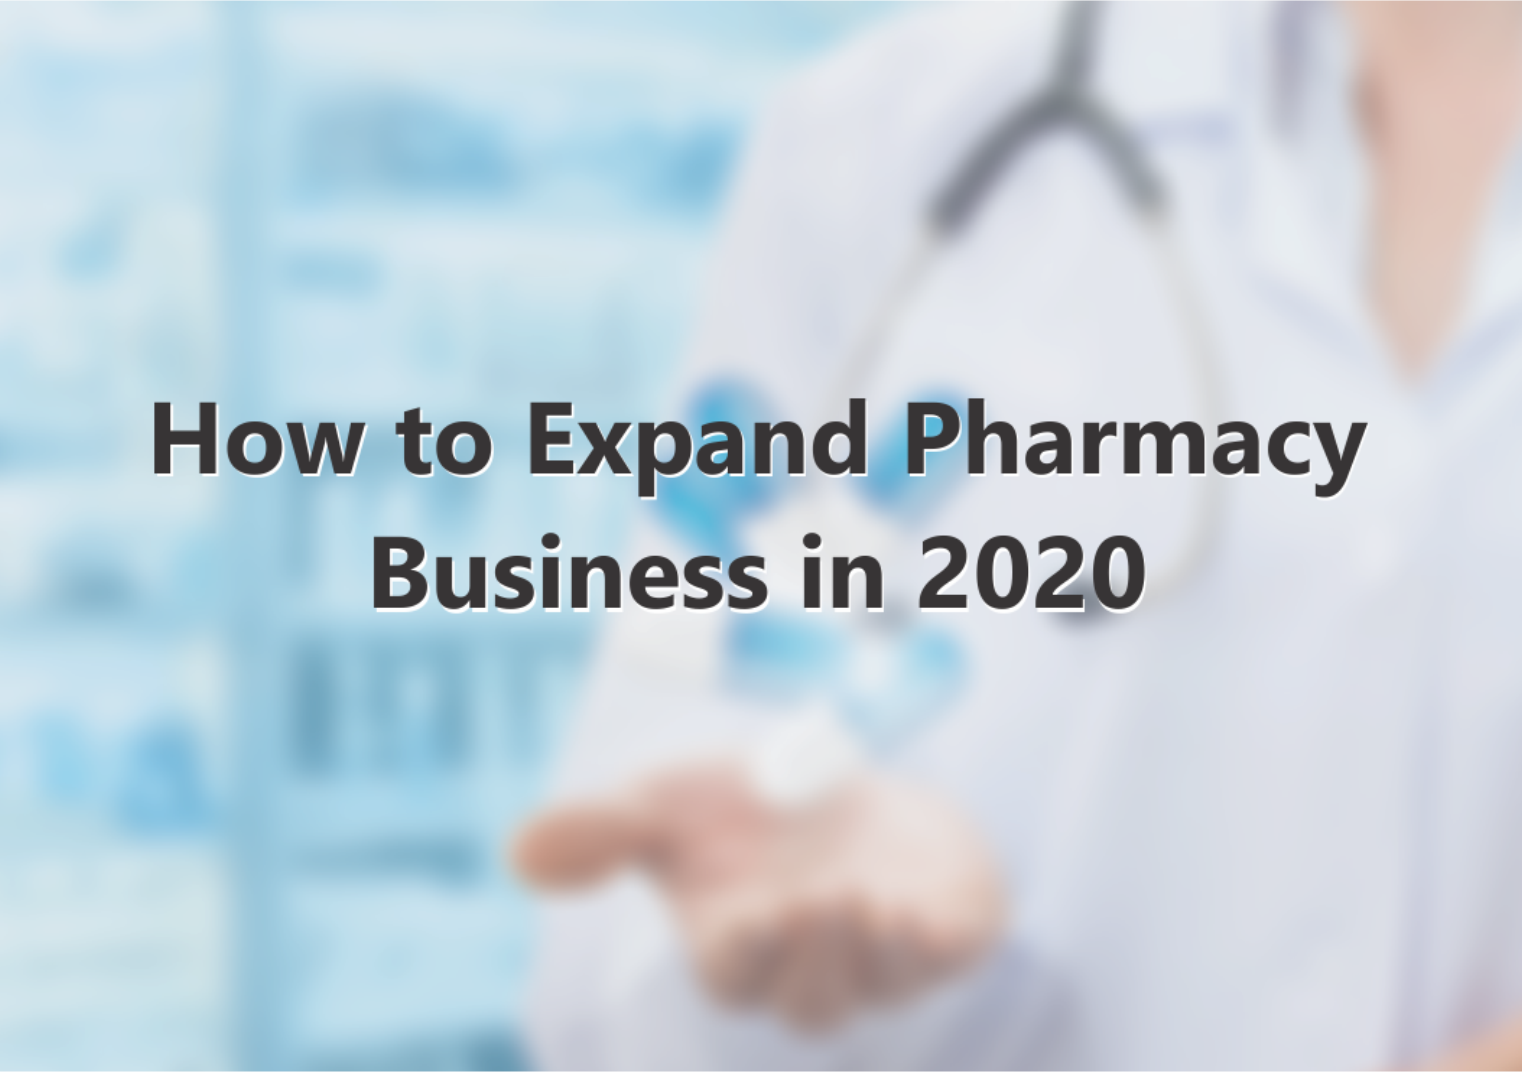 How to Expand Pharmacy Business in 2020